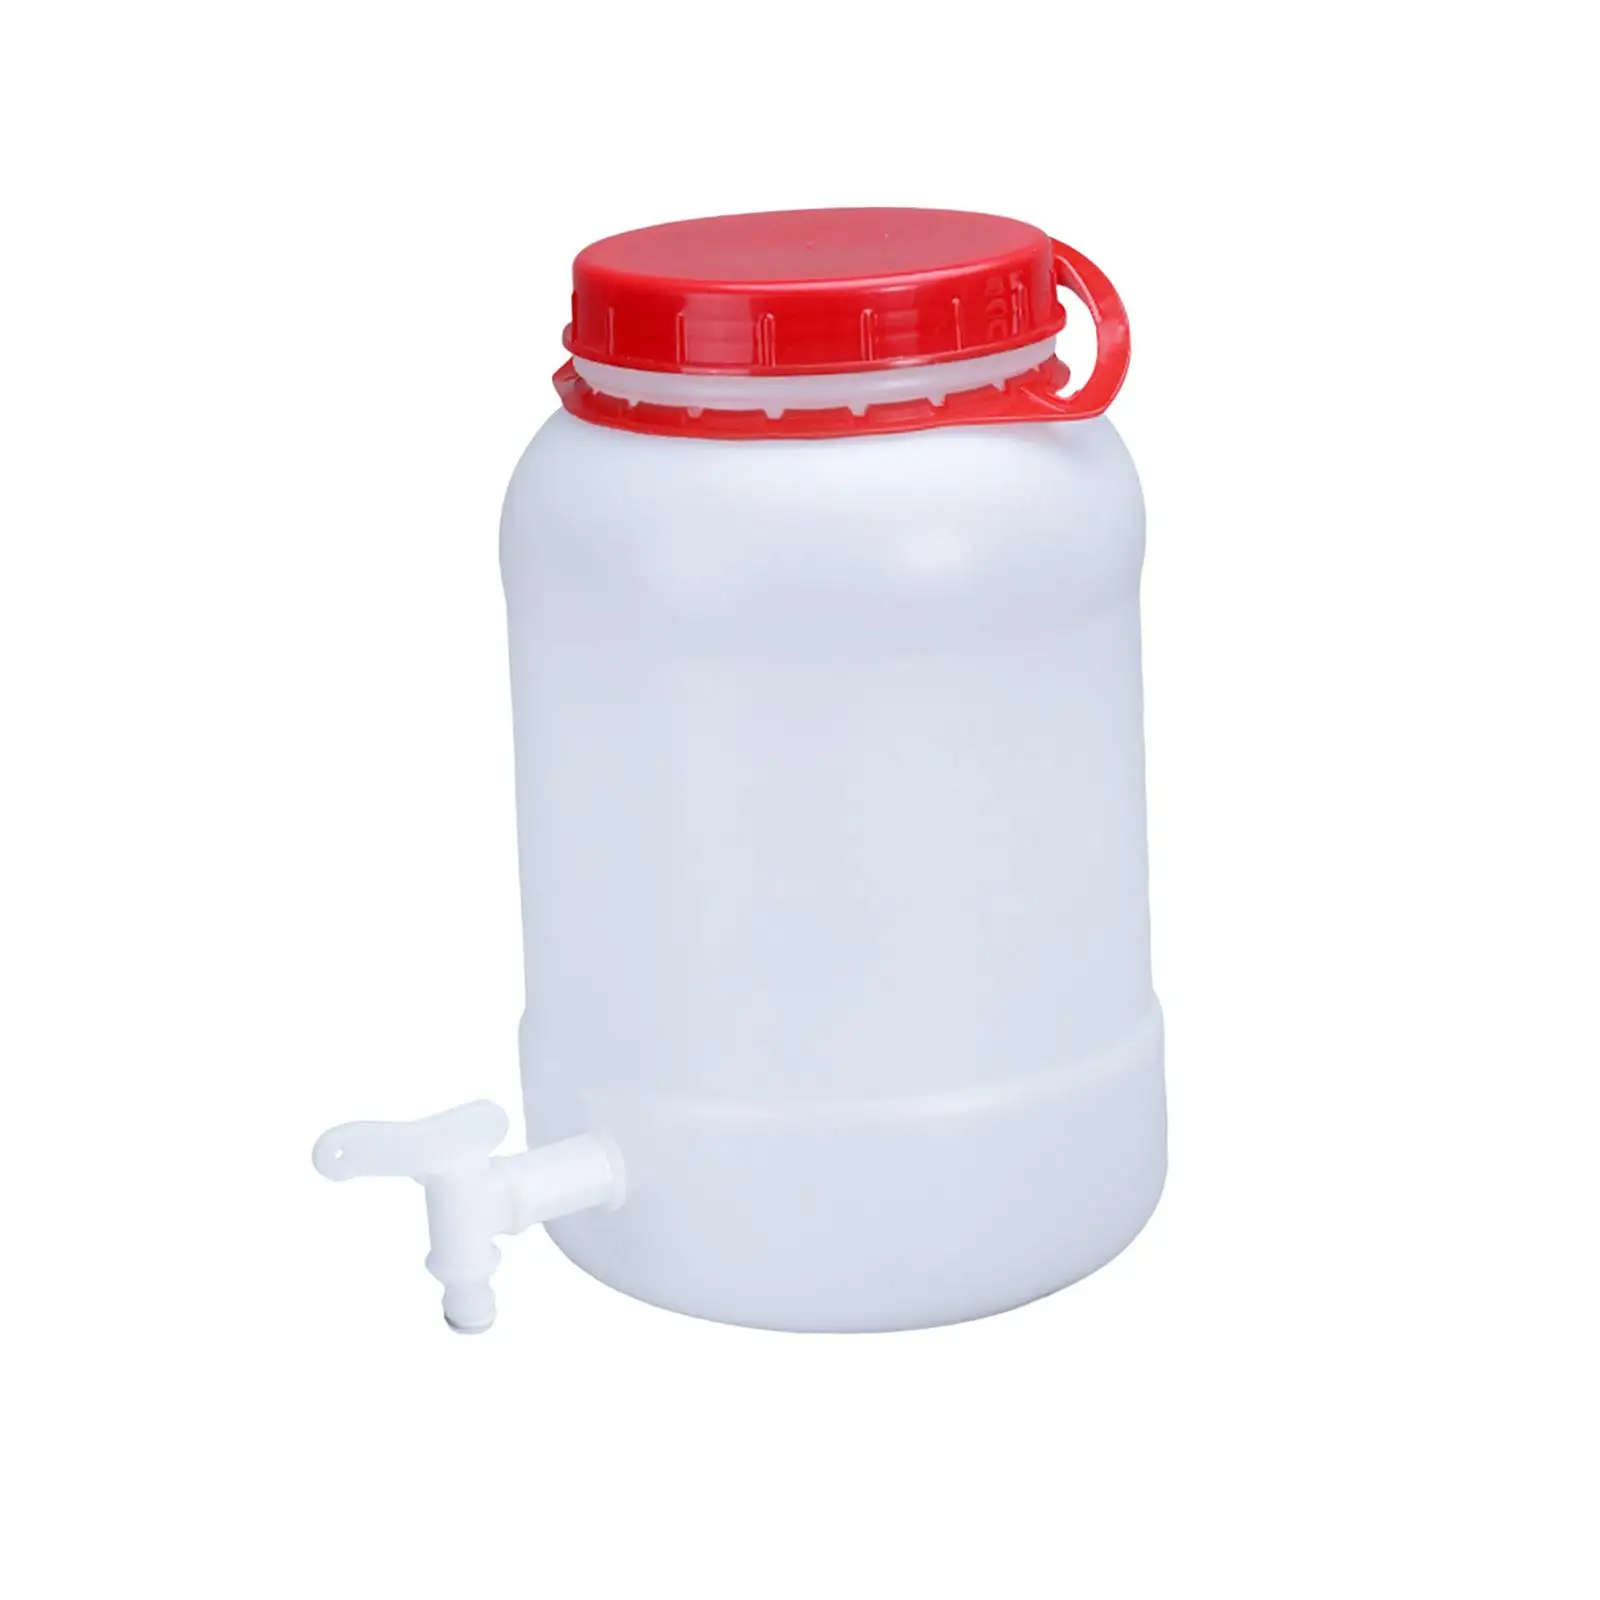 Water Carrier with Spigot Water Jug Portable with Lid Canister Water Storage Carrier Water Bucket for Picnic Hiking Backpacking